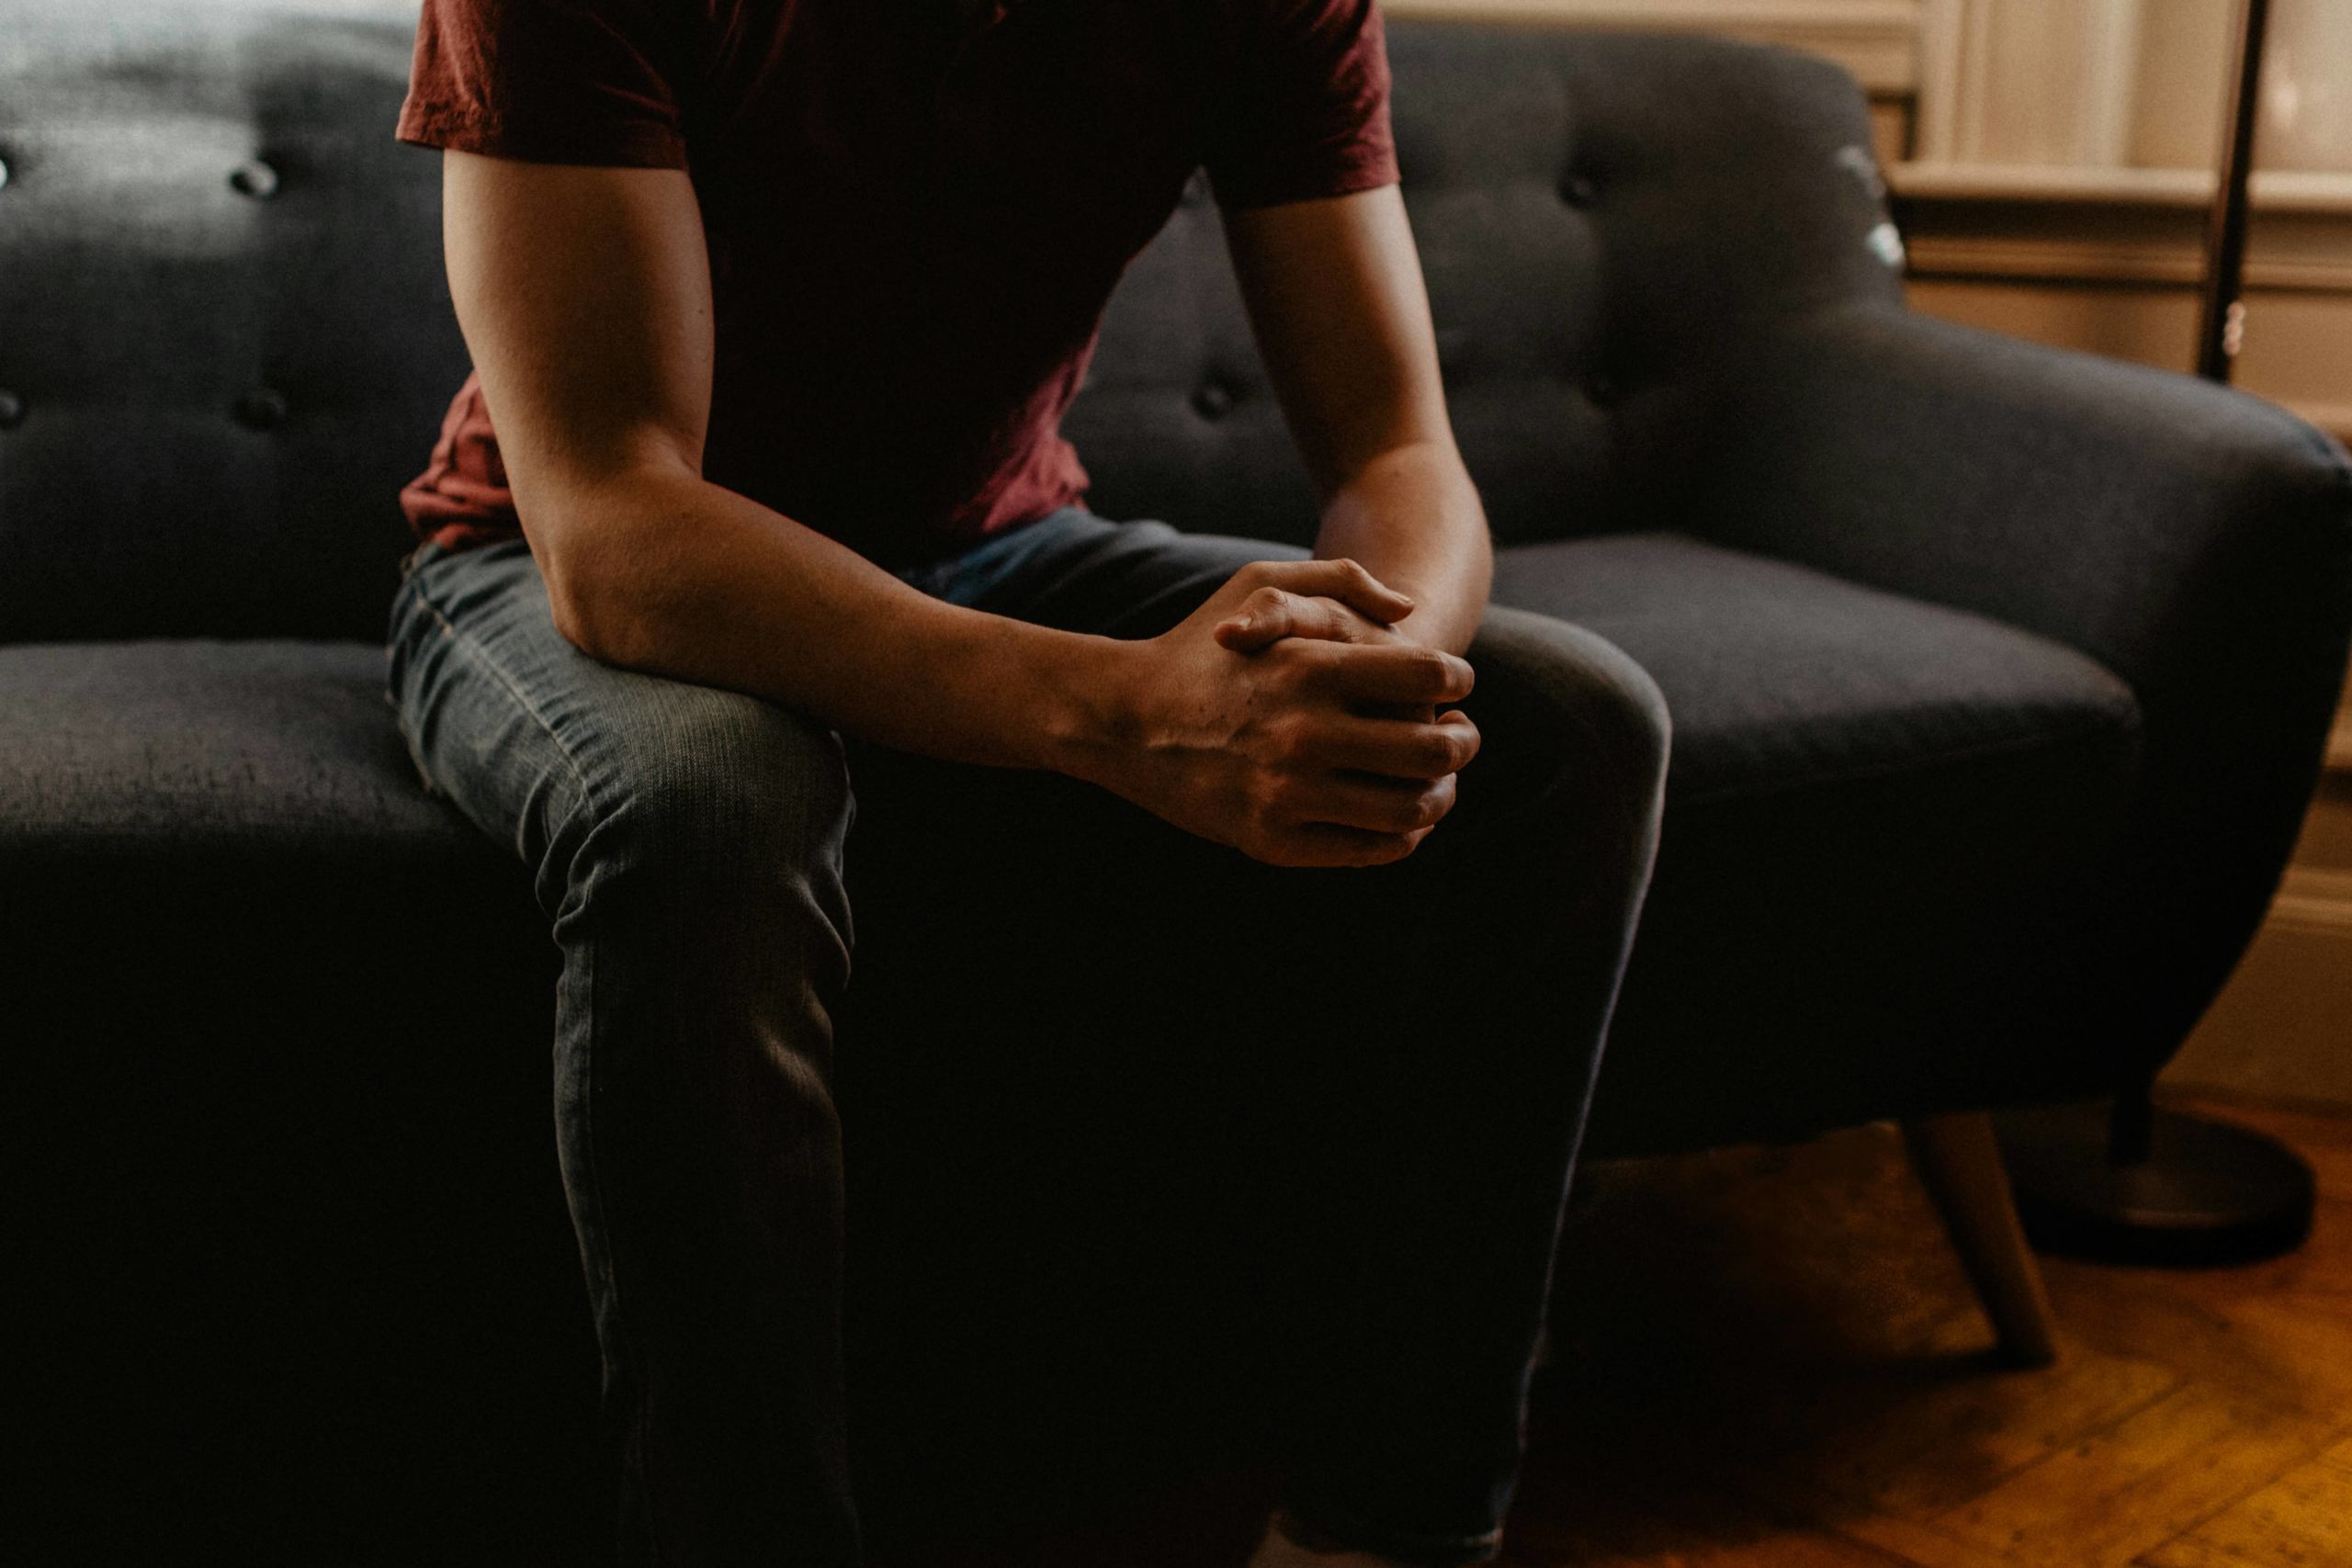 Image of a man sitting on a couch leaning forward with his hands folded together. Do you have past religious trauma? Discover how a skilled trauma therapist can help support you with online trauma therapy in Austin, TX.